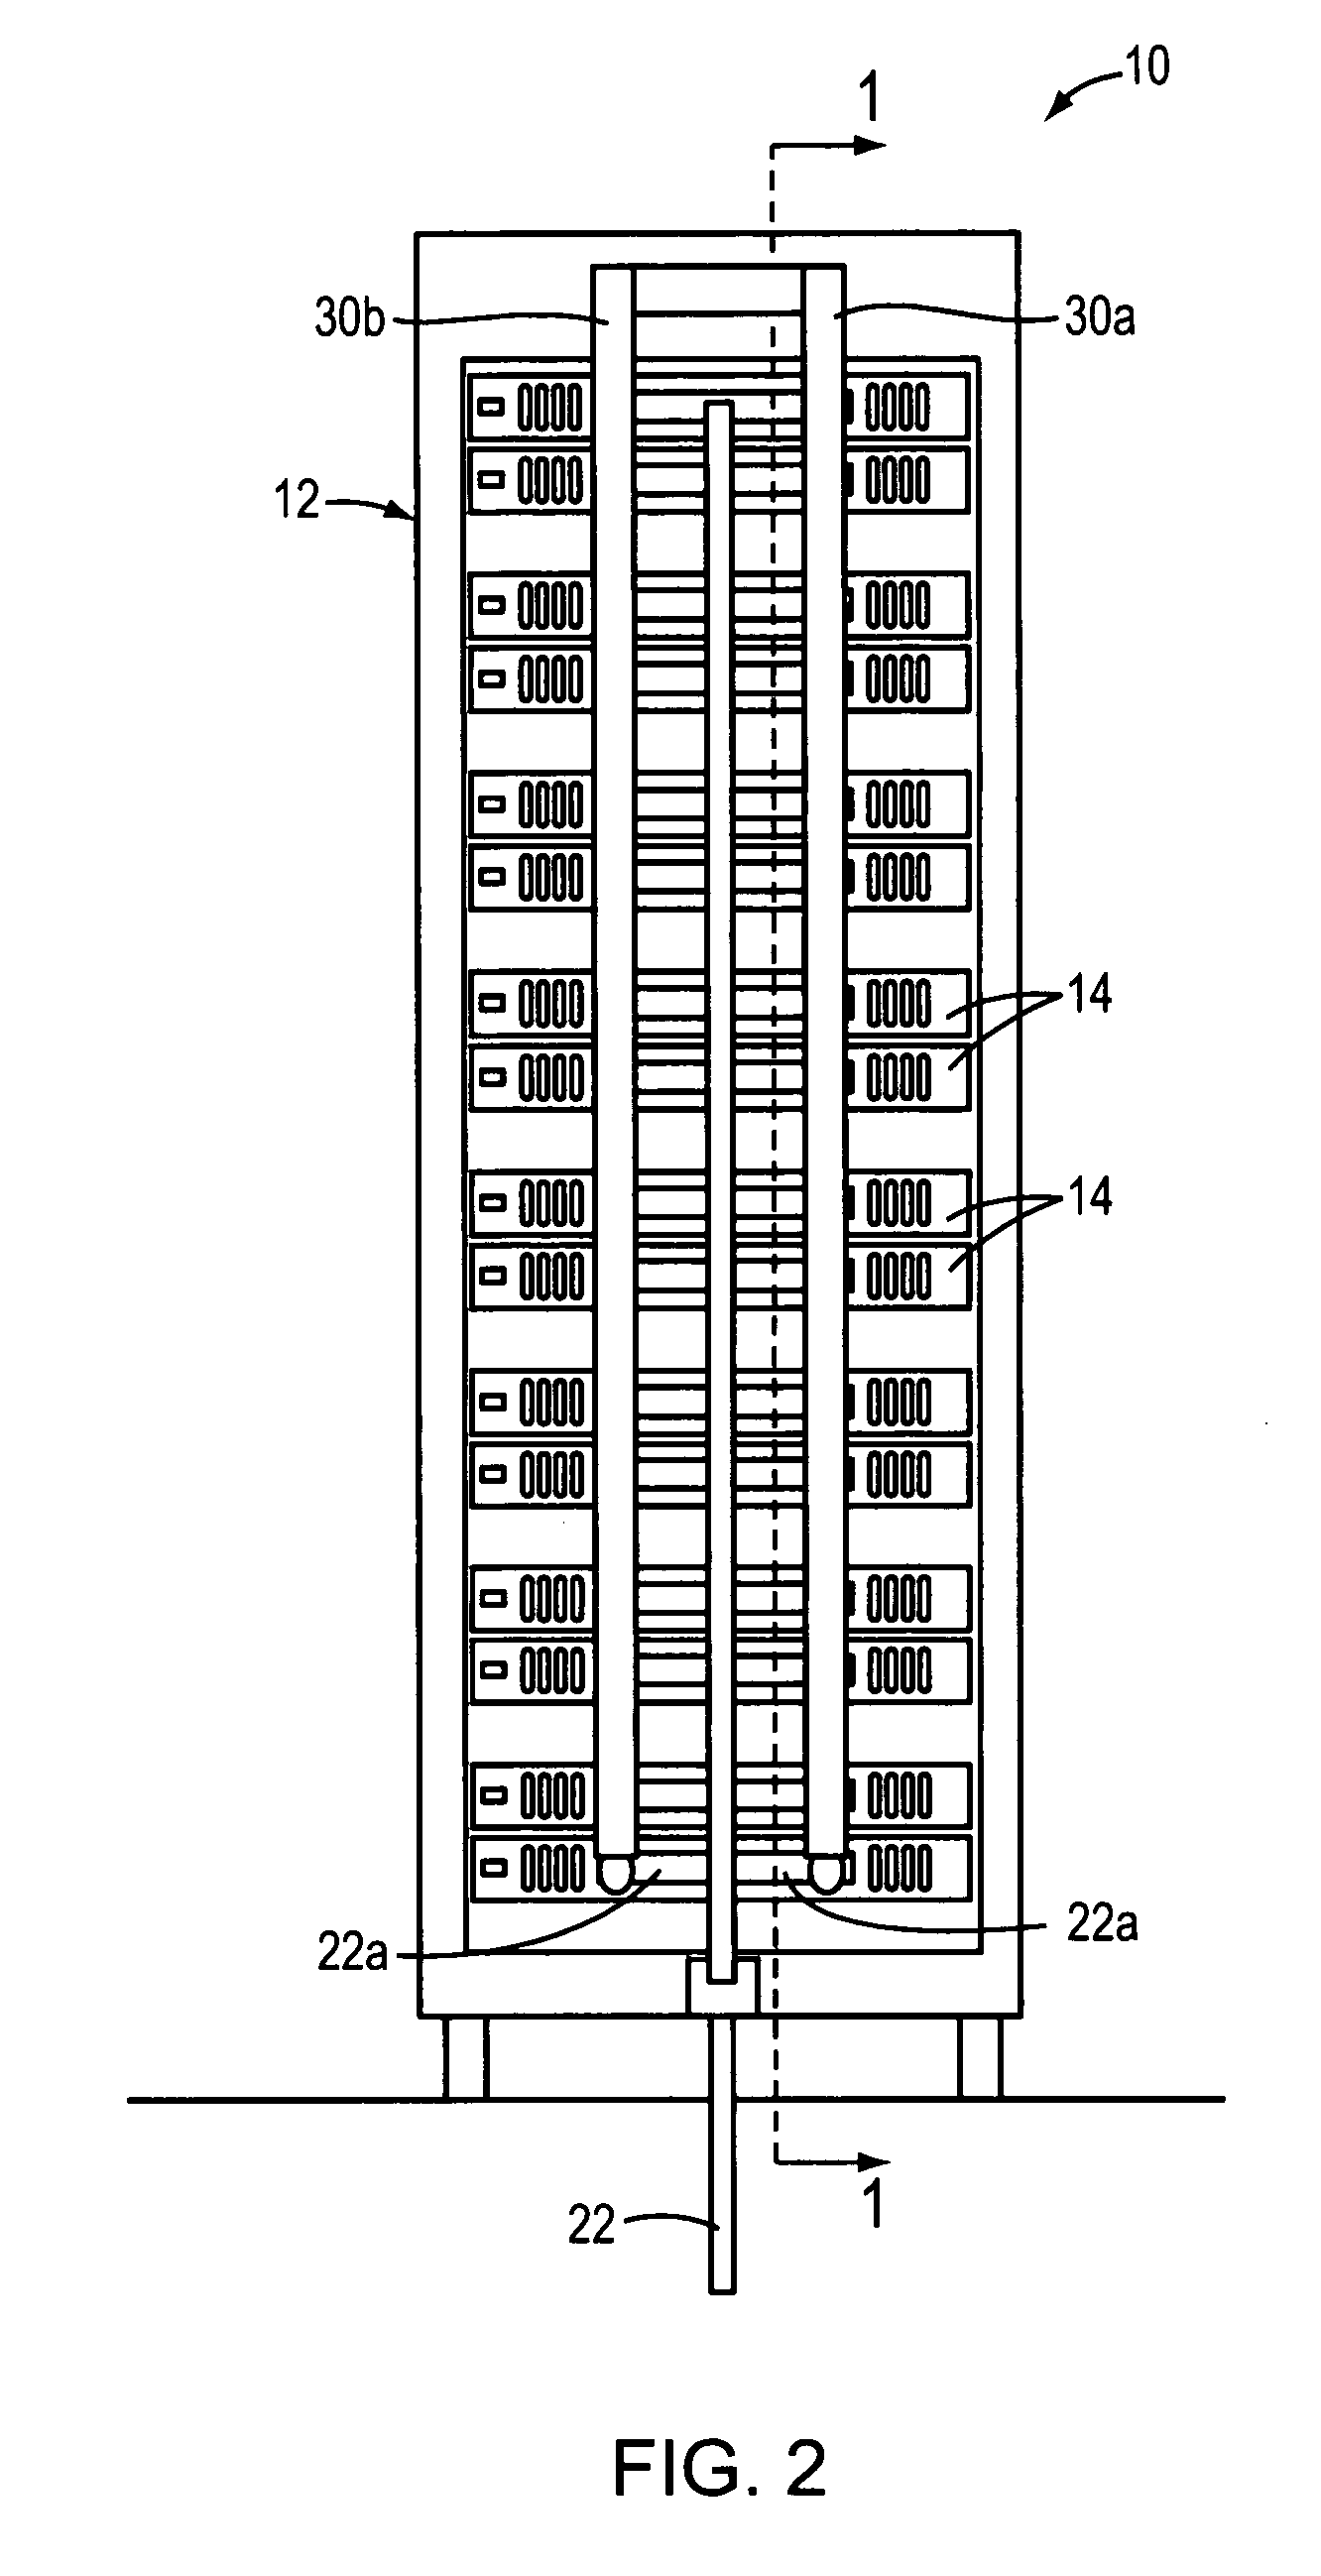 Method and system for providing cooling of components in a data storage system